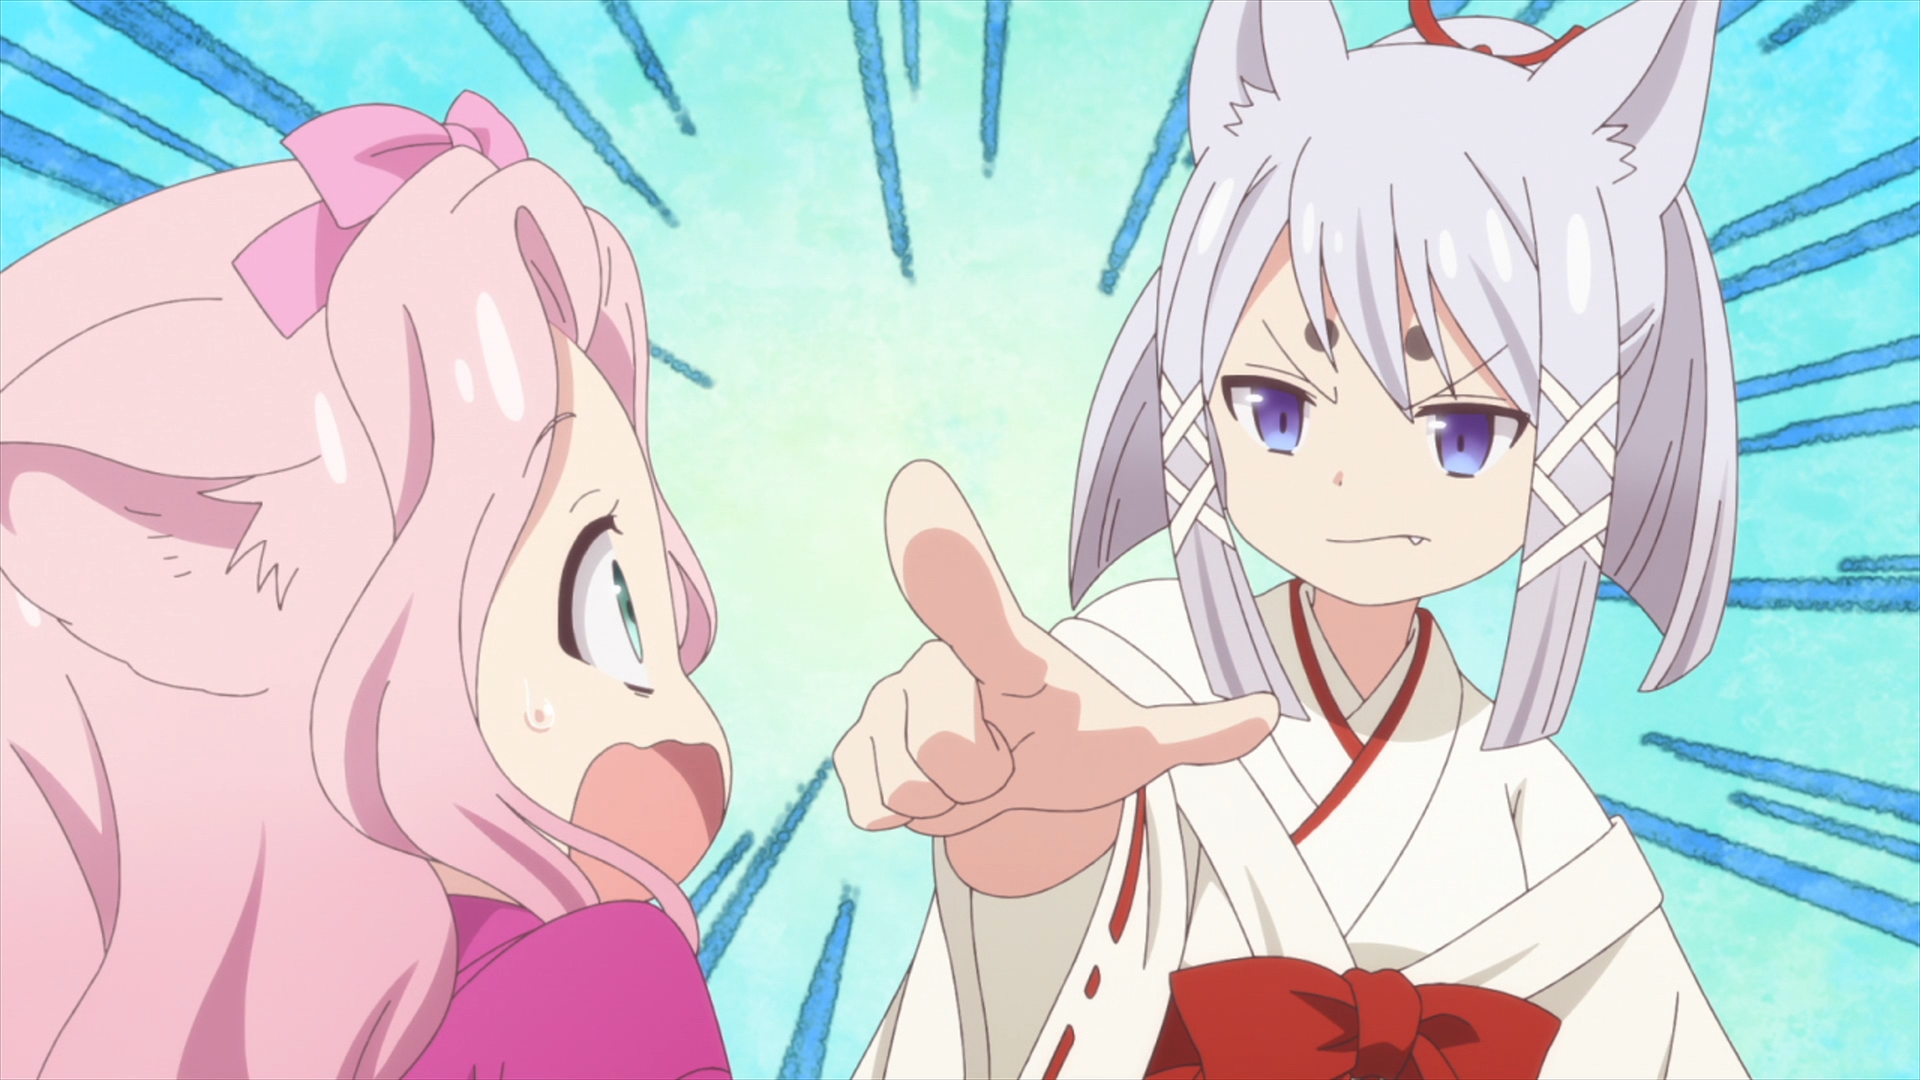 Ren is intimidated by Hiiragi's brash personality in a scene from the 2017 KONOHANA KITAN TV anime.